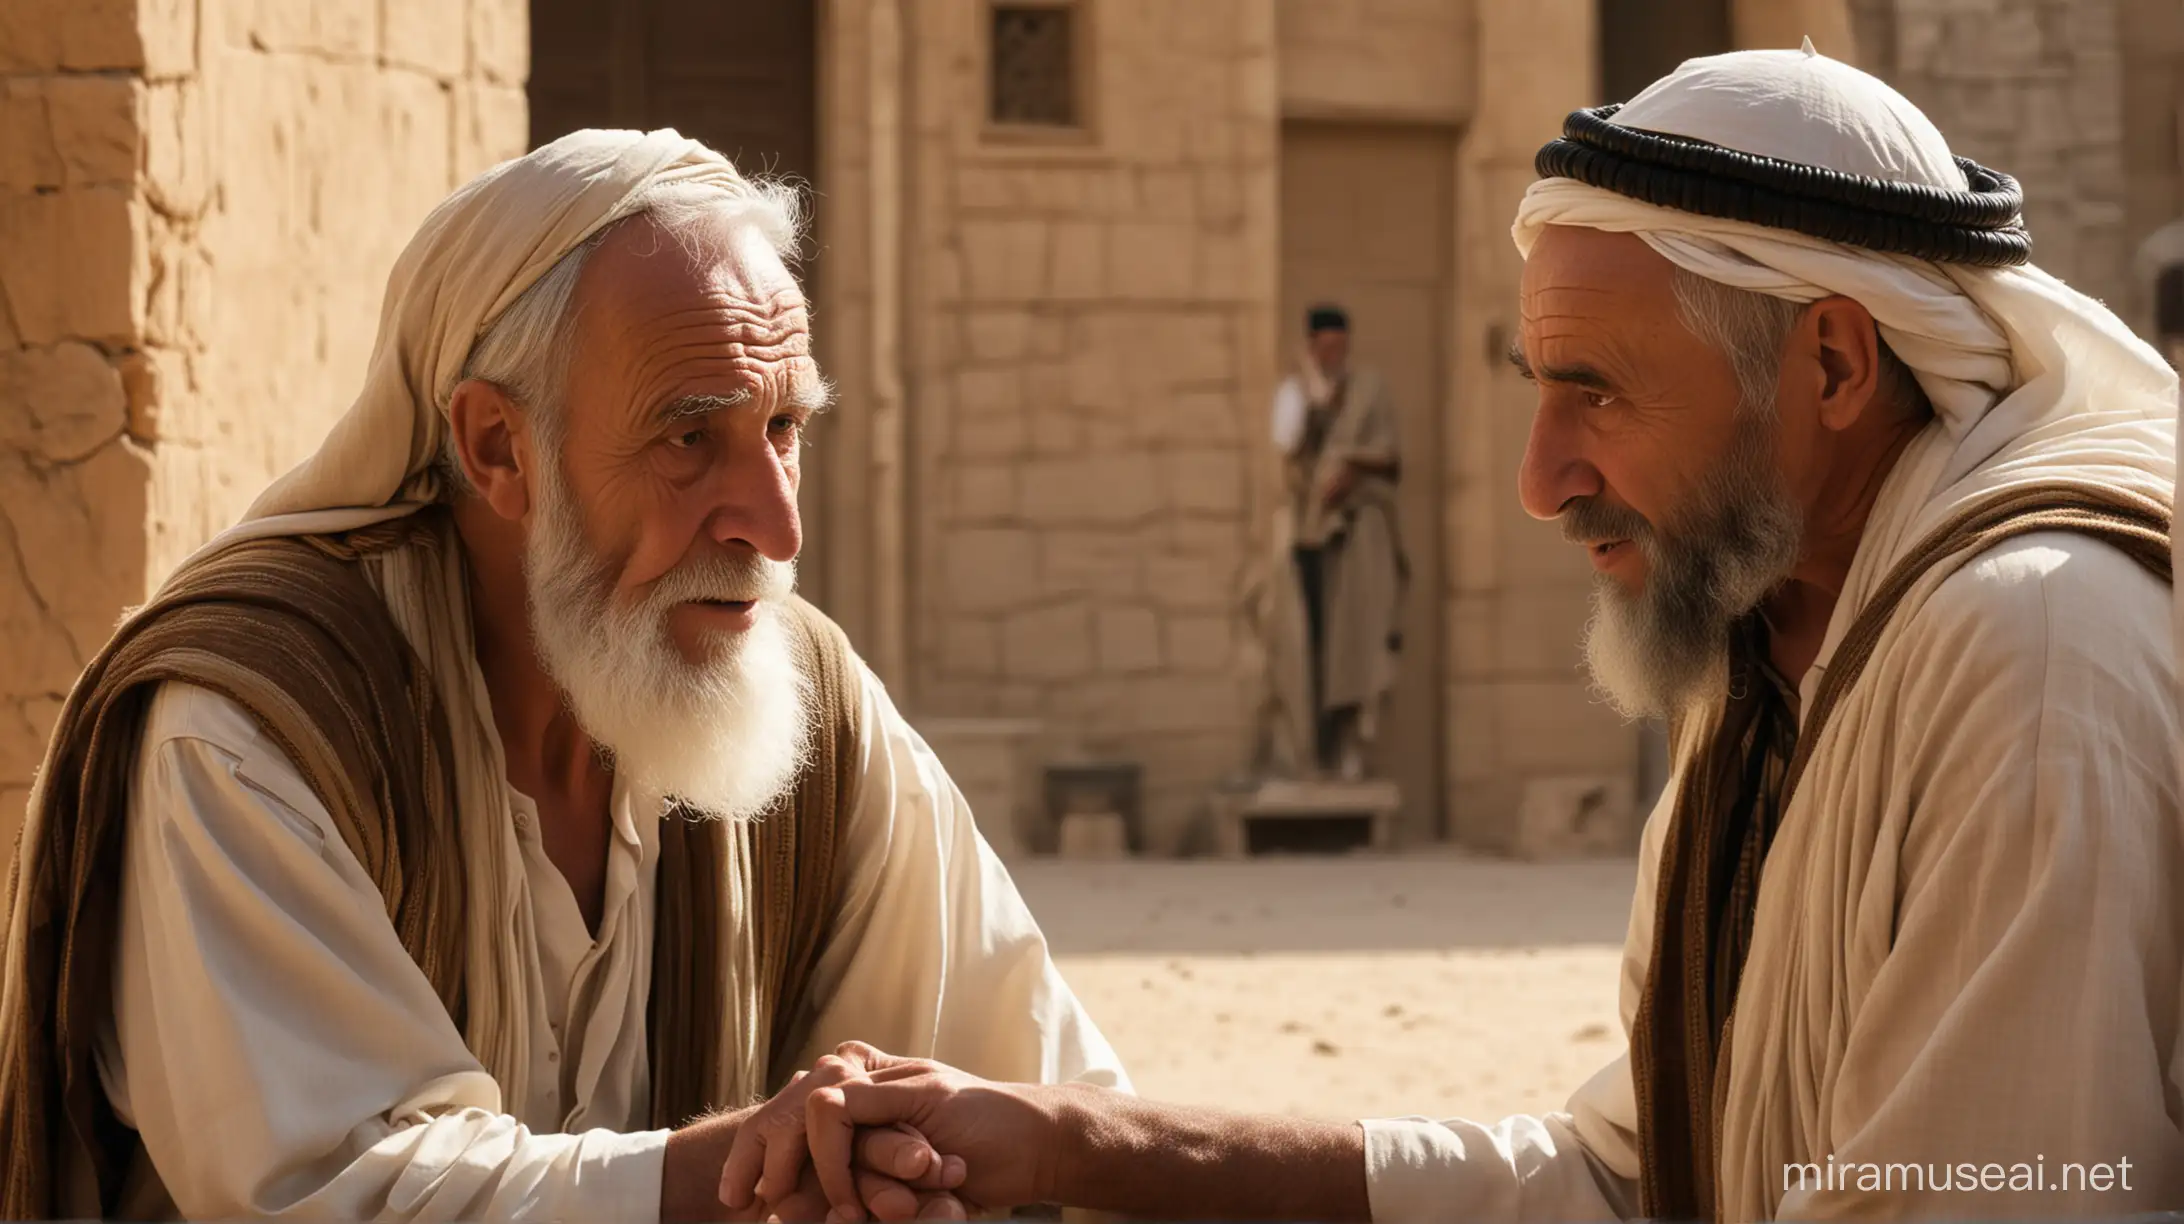 An old man talking to a young man . set in the Middle East during the era of the Biblical Abraham.